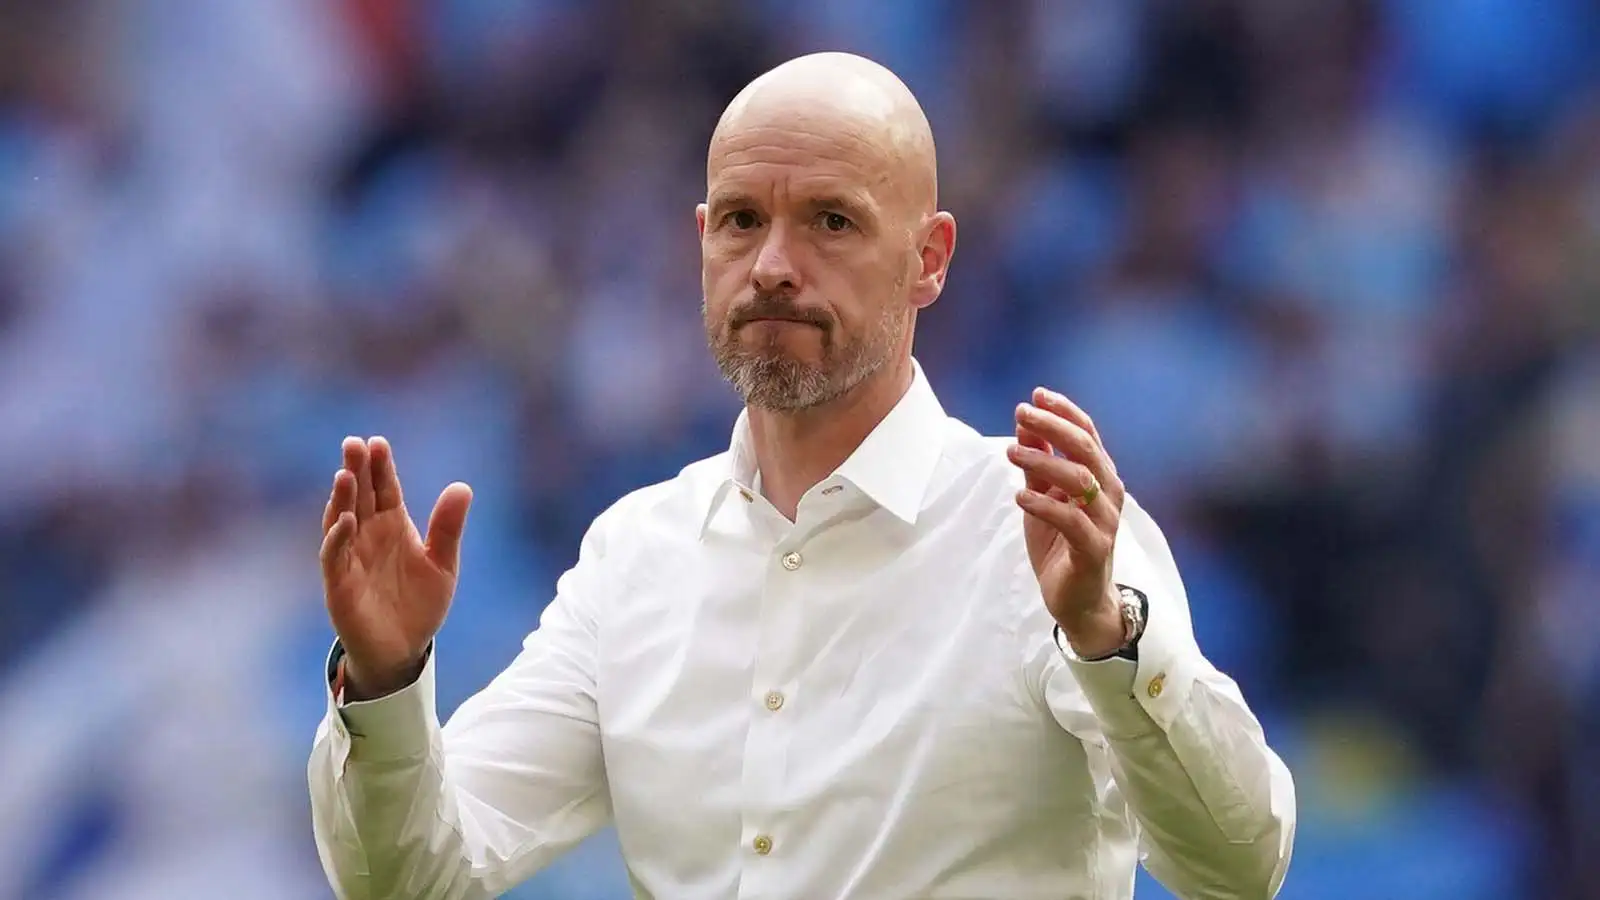 Manchester United manager Erik ten Hag after the final whistle in the Emirates FA Cup final at Wembley Stadium, London.